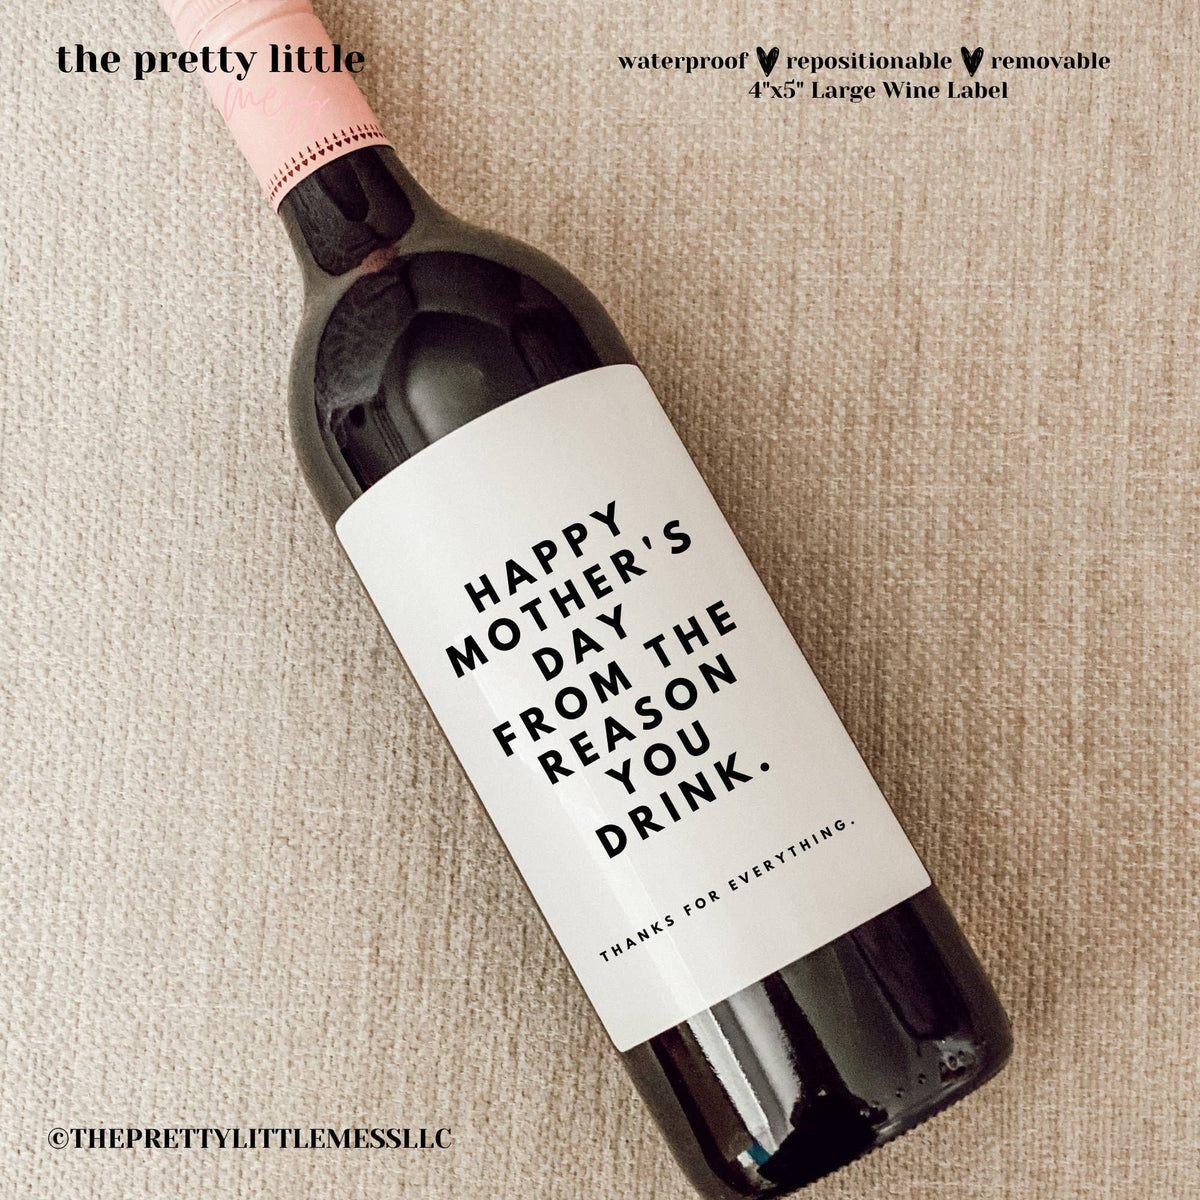 MOTHER'S DAY WINE LABEL: HAPPY MOTHER'S DAY FROM THE REASON YOU DRINK. THANKS FOR EVERYTHING.